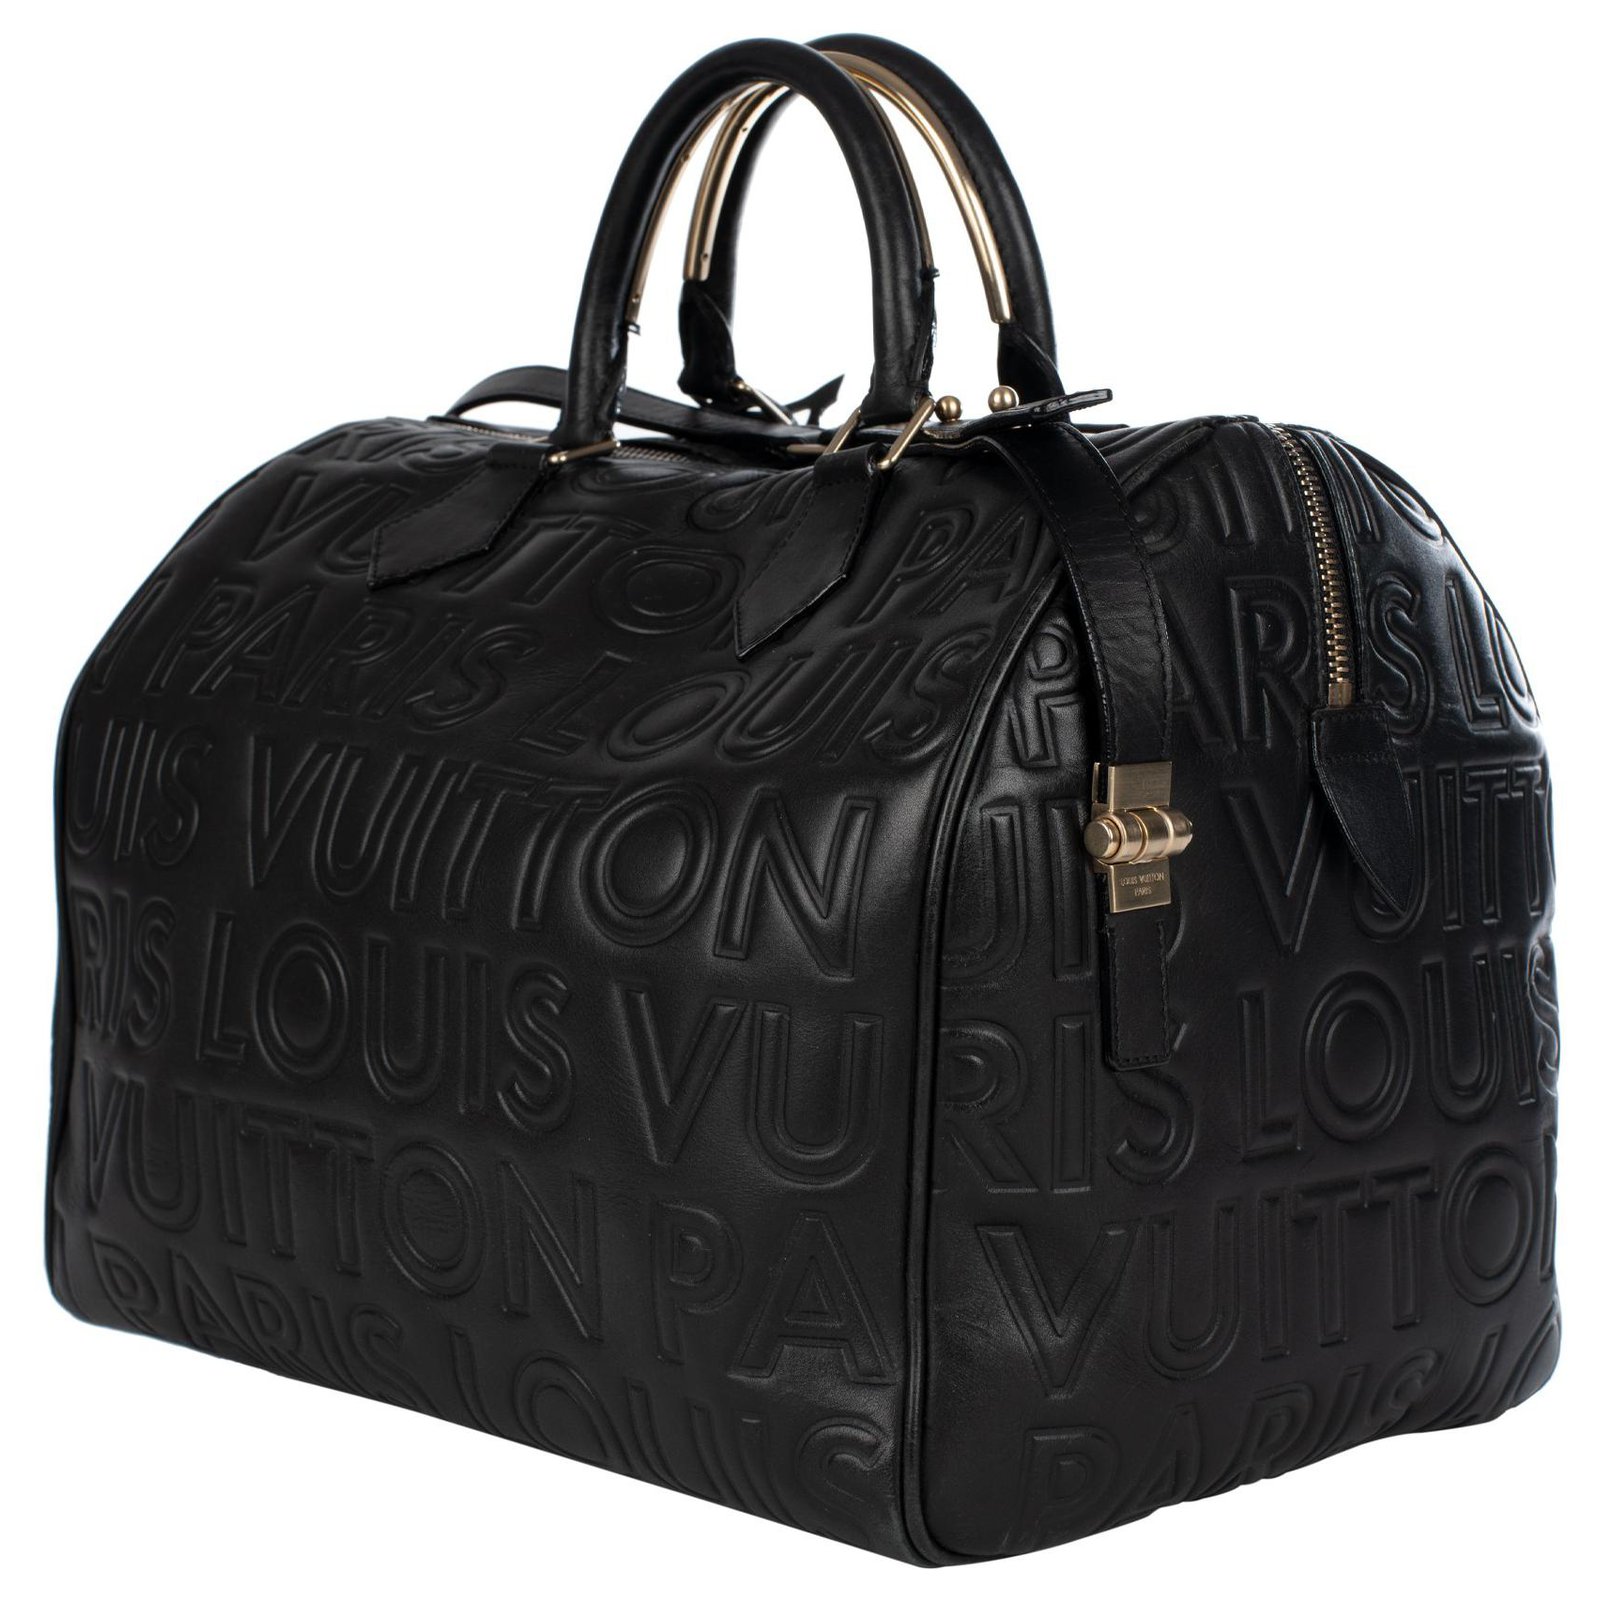 Sac Louis Vuitton speedy 30 in black imprinted leather, limited